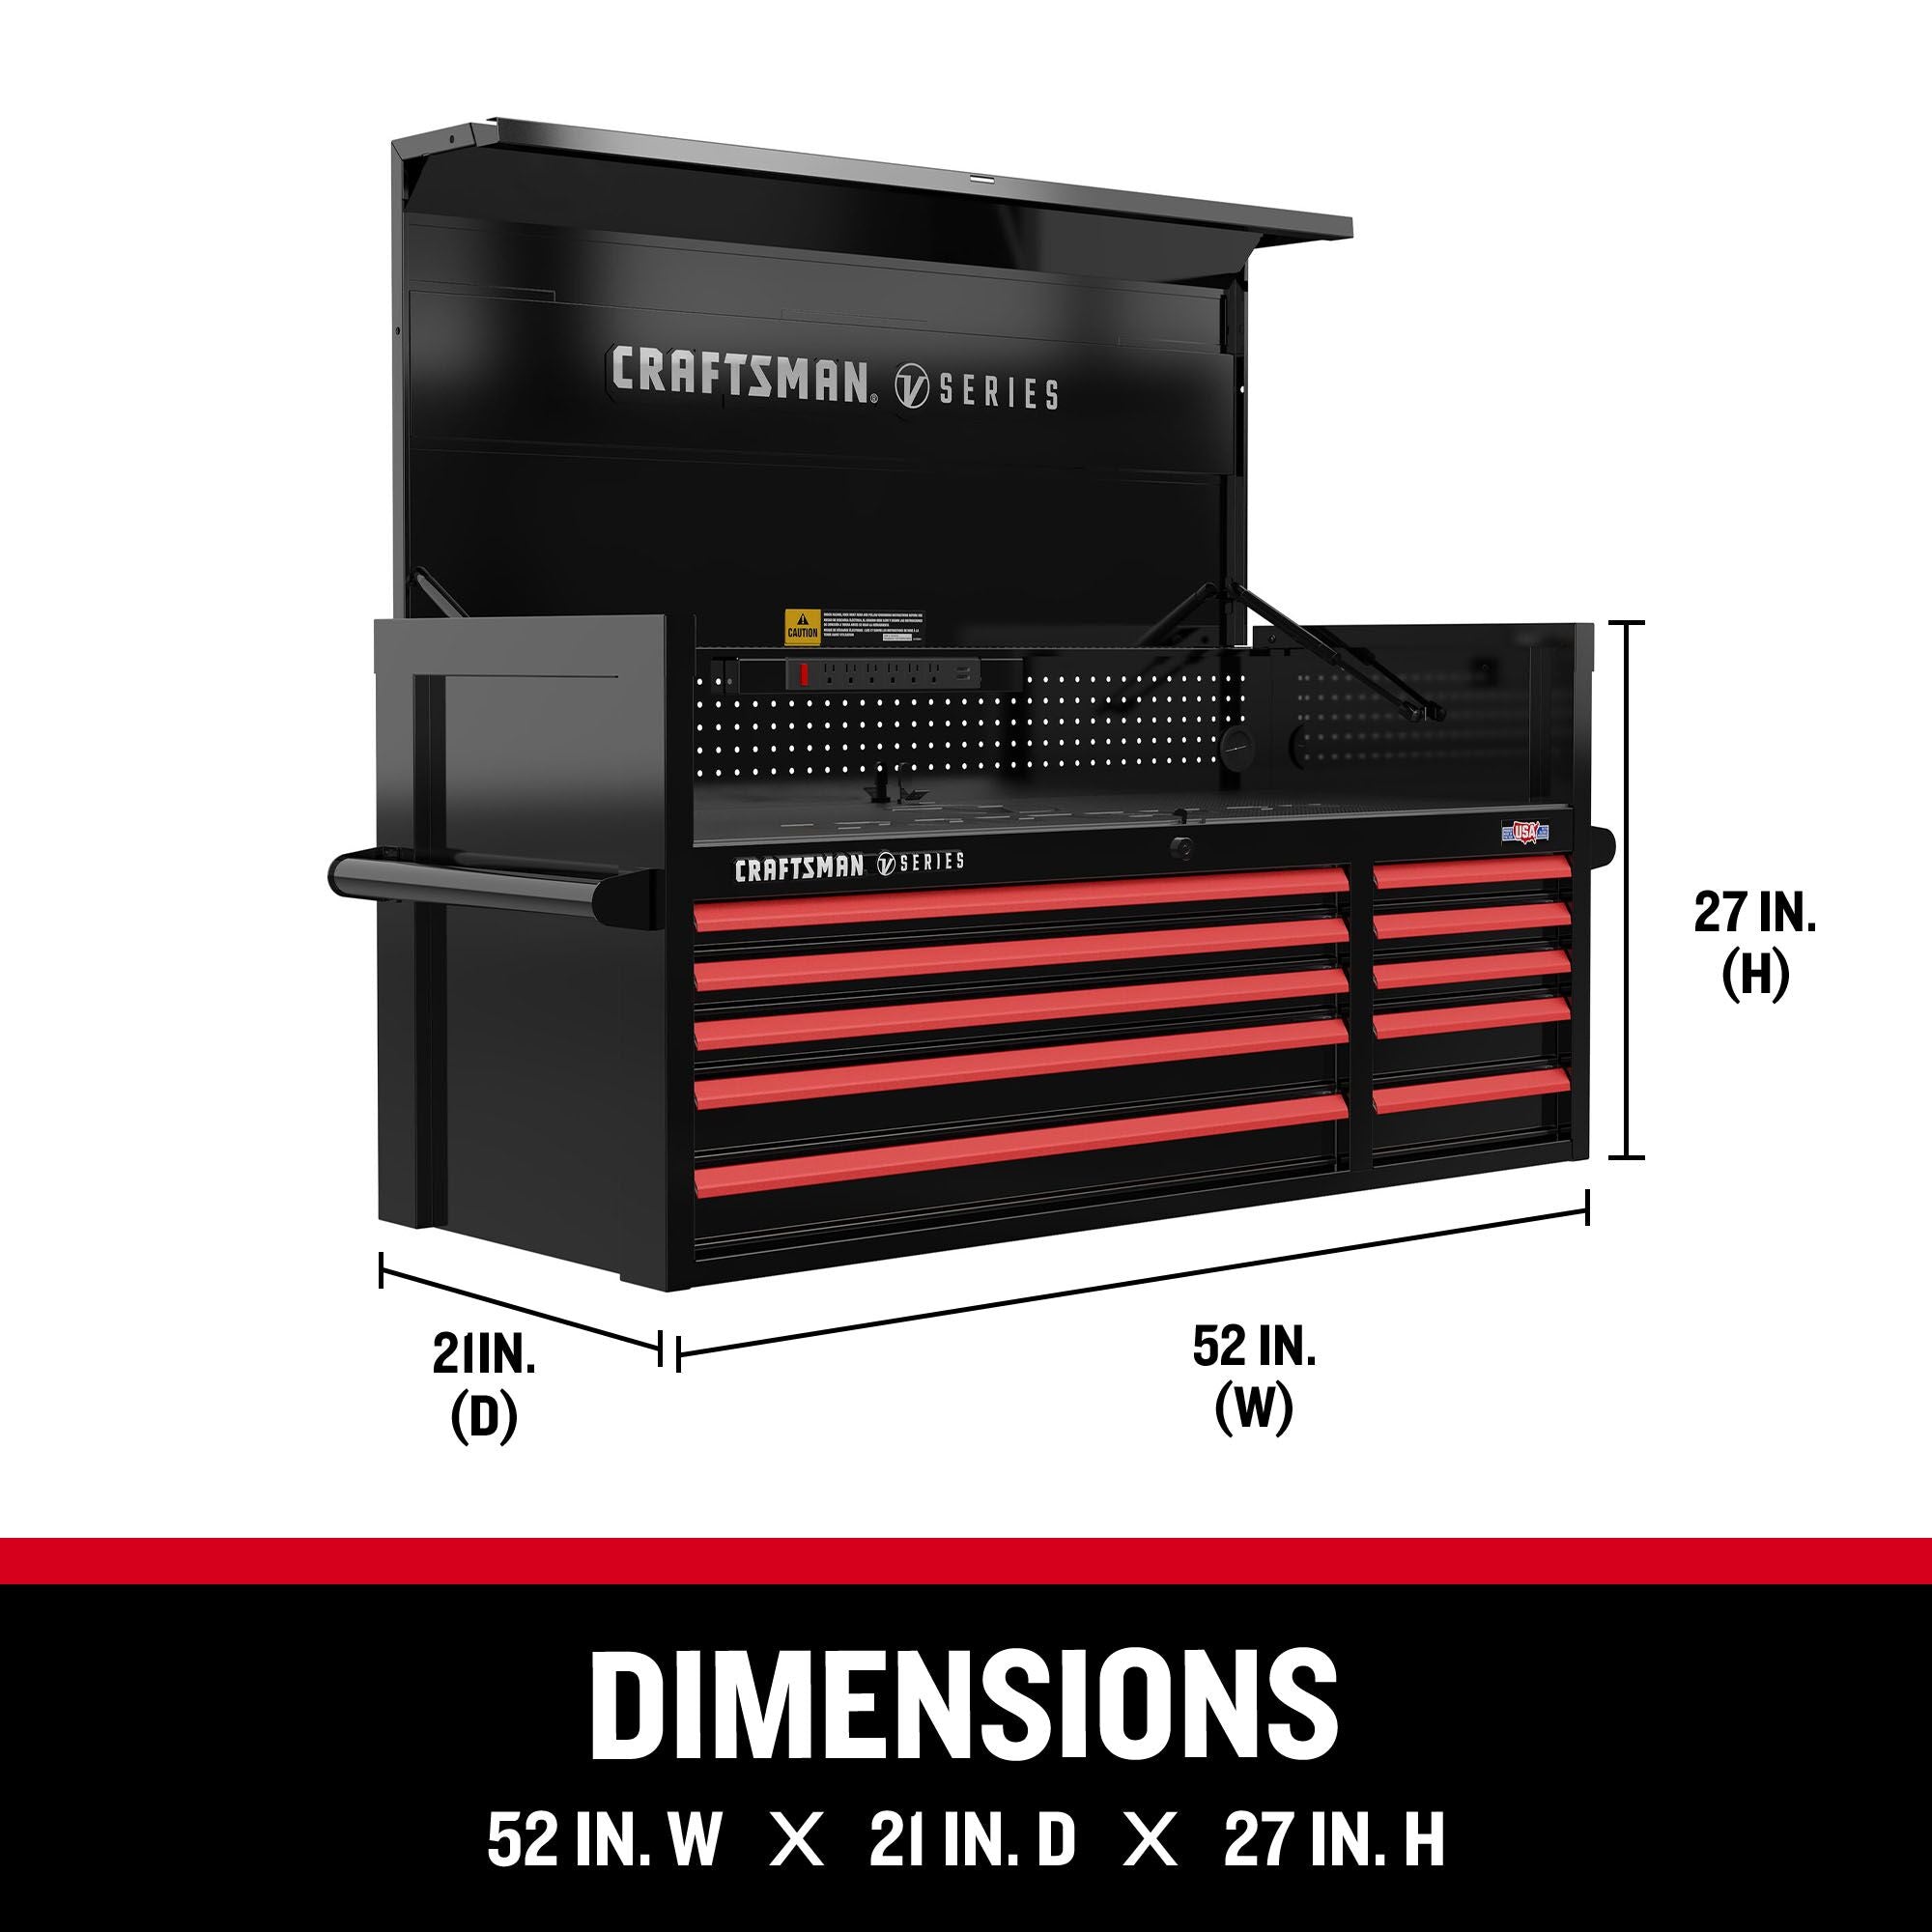 CRAFTSMAN V-Series 52-inch chest with dimensions feature call out